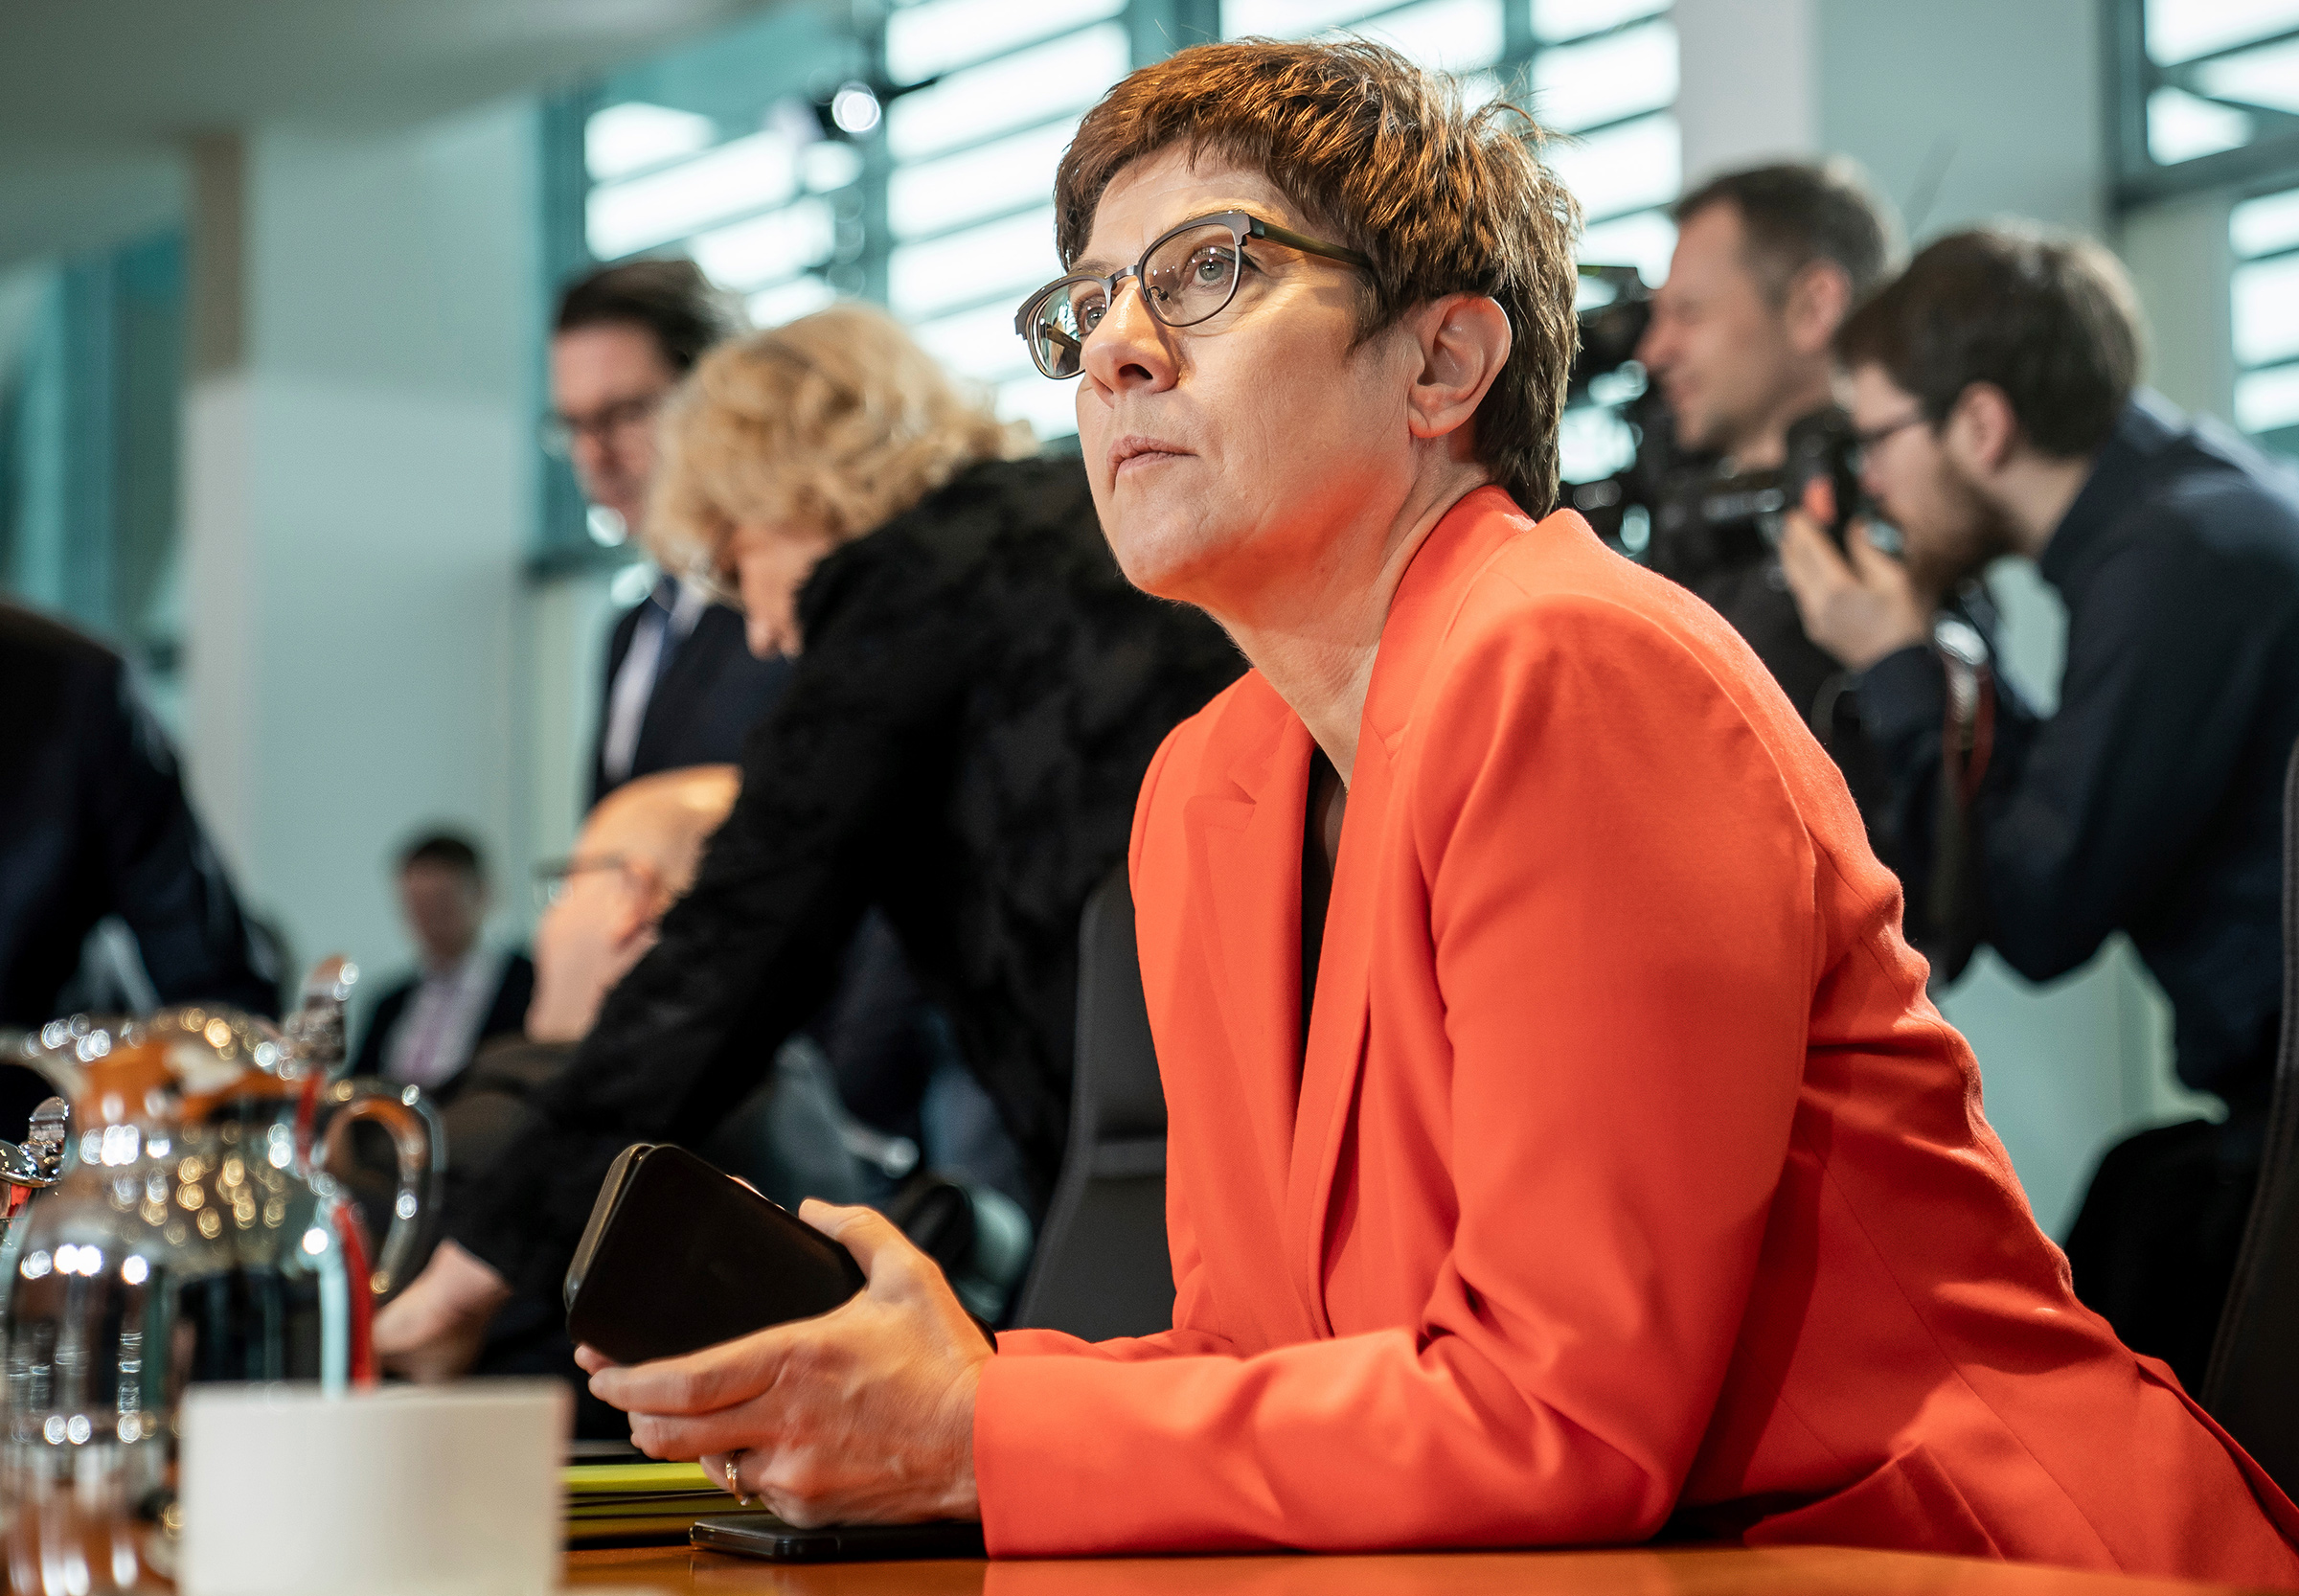 Feb. 19, Berlin: Annegret Kramp-Karrenbauer (CDU), Federal Minister of Defence, is waiting for the start of the weekly cabinet meeting in the Chancellery. Among other things, the federal government wants to pass the bill for a basic pension for low earners. (Michael Kappeler—Picture-Alliance/dpa/AP)